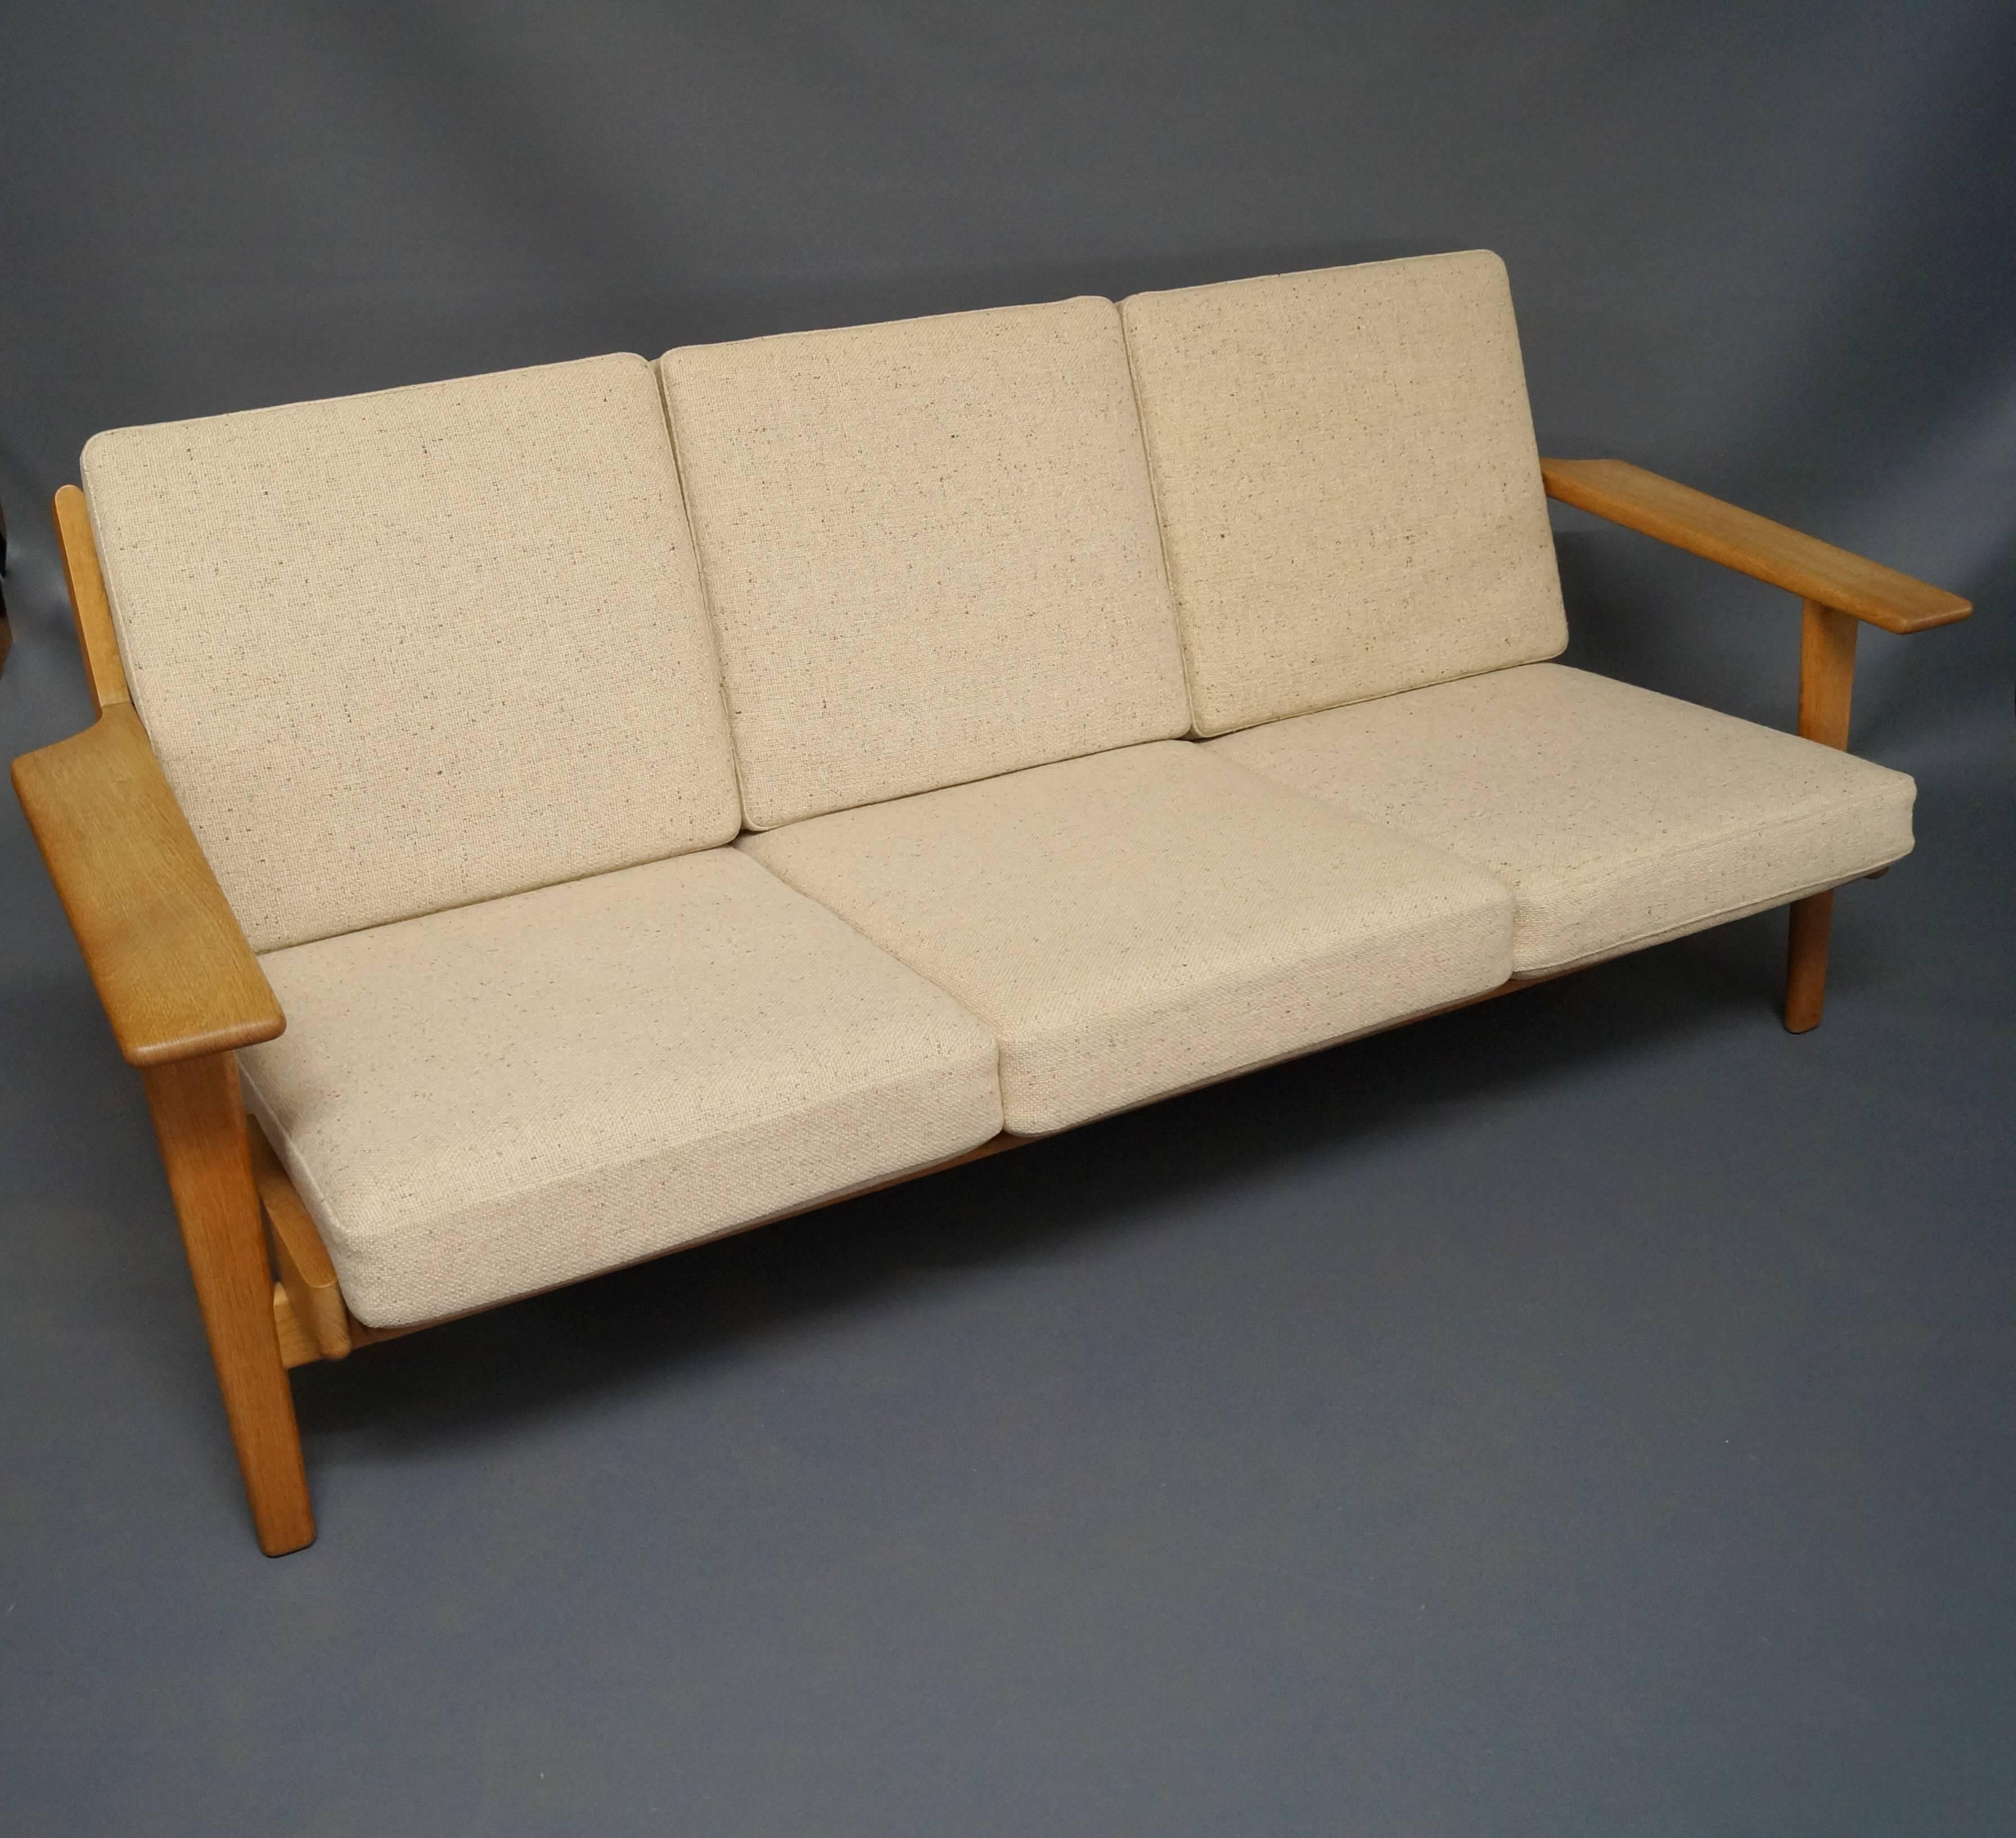 GE 290 three persons sofa designed by Hans J. Wegner in 1953 and manufactured by GETAMA in the 1960s. The sofa is in oak and light Hallingdal wool.
 